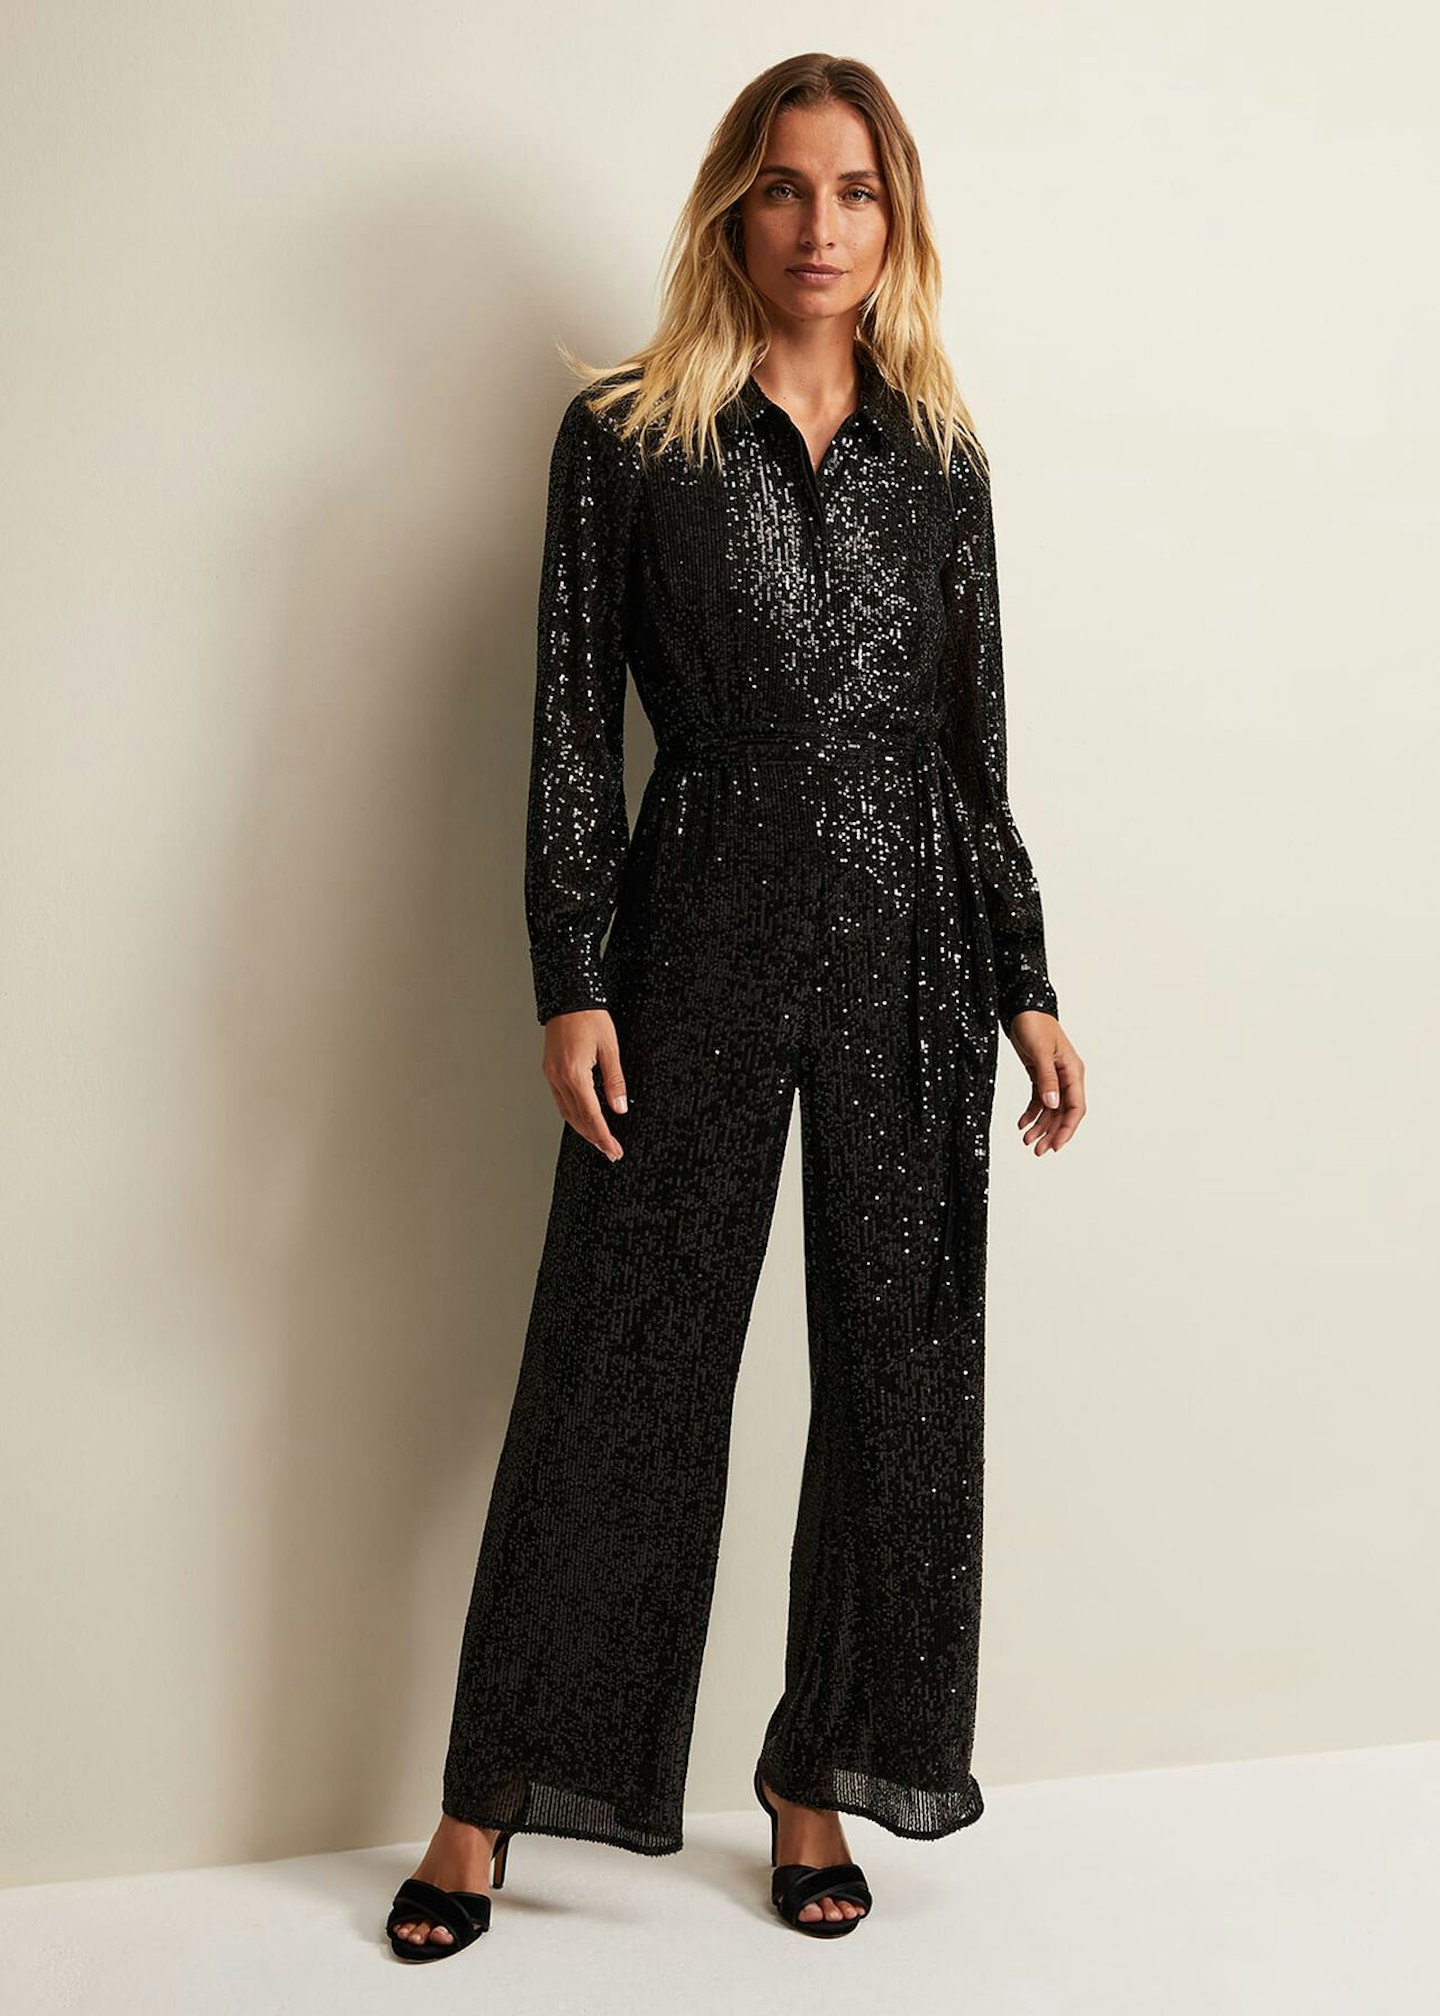 Claudia Winkleman's Strictly Jumpsuit: On Sale For Black Friday